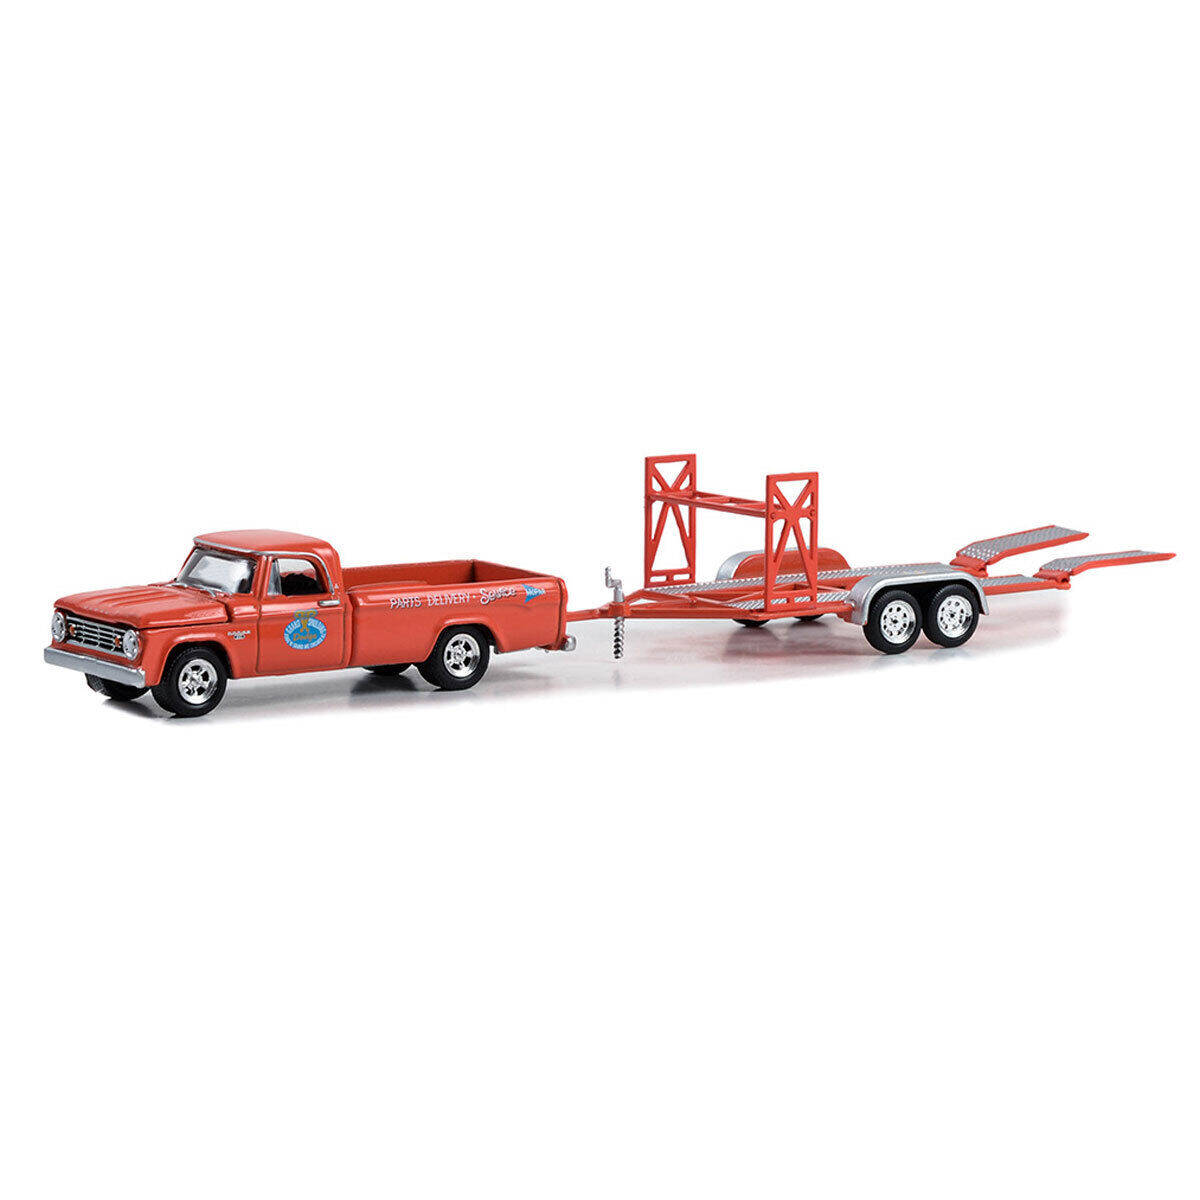 Greenlight 1/64 Hitch & Tow Series 29- 1967 Dodge D-100 - Mr. Norm's Grand Spaulding Dodge with Tandem Car Trailer 32290-A